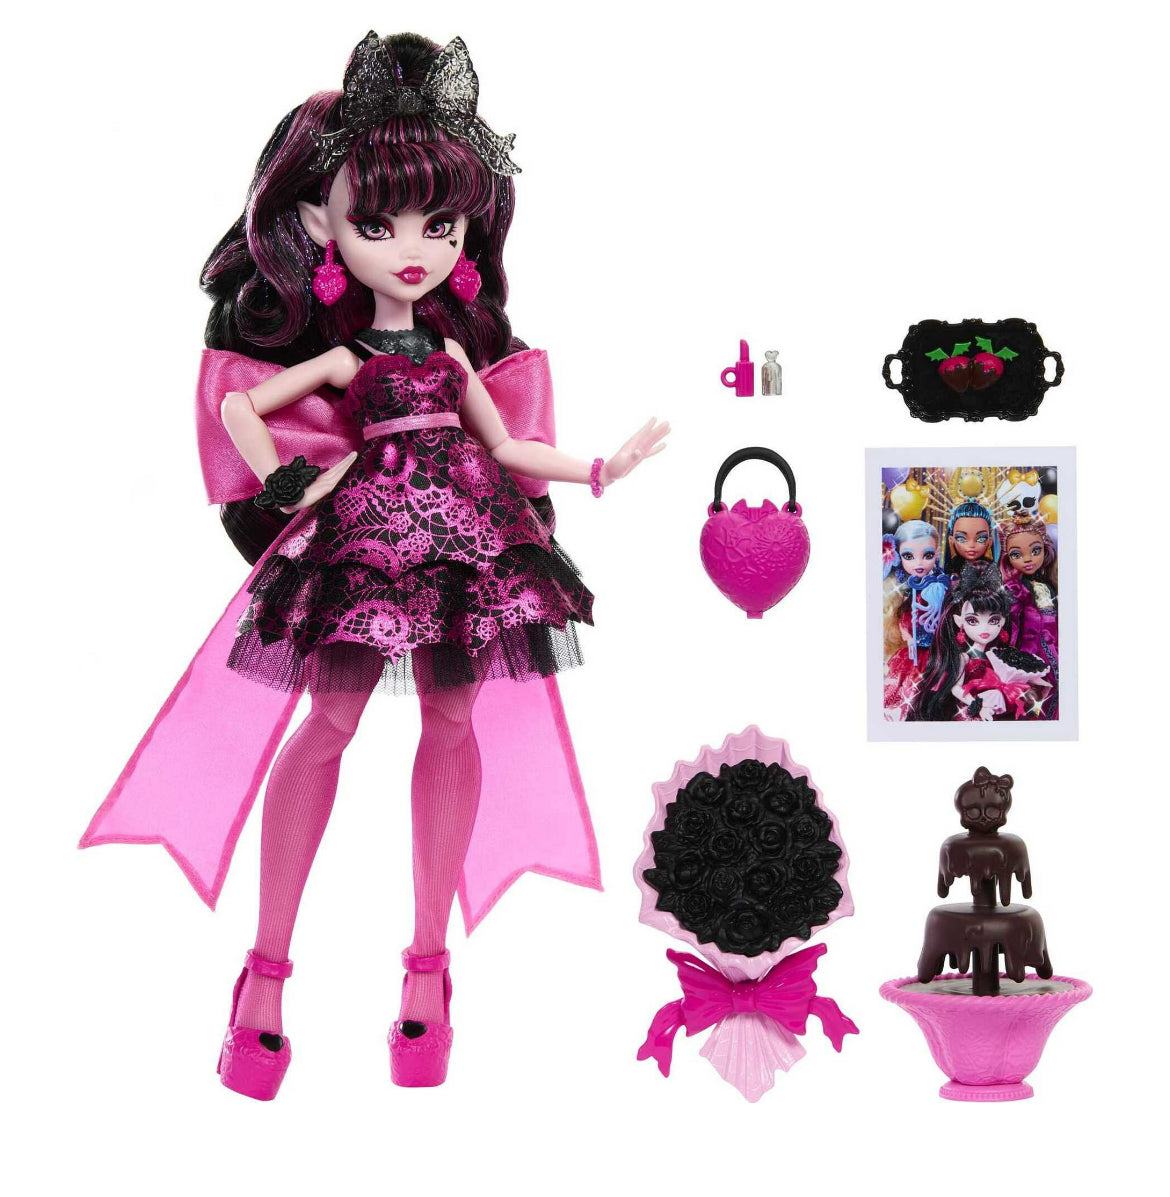 Monster High Student Lounge Playset, Furniture and Accessories